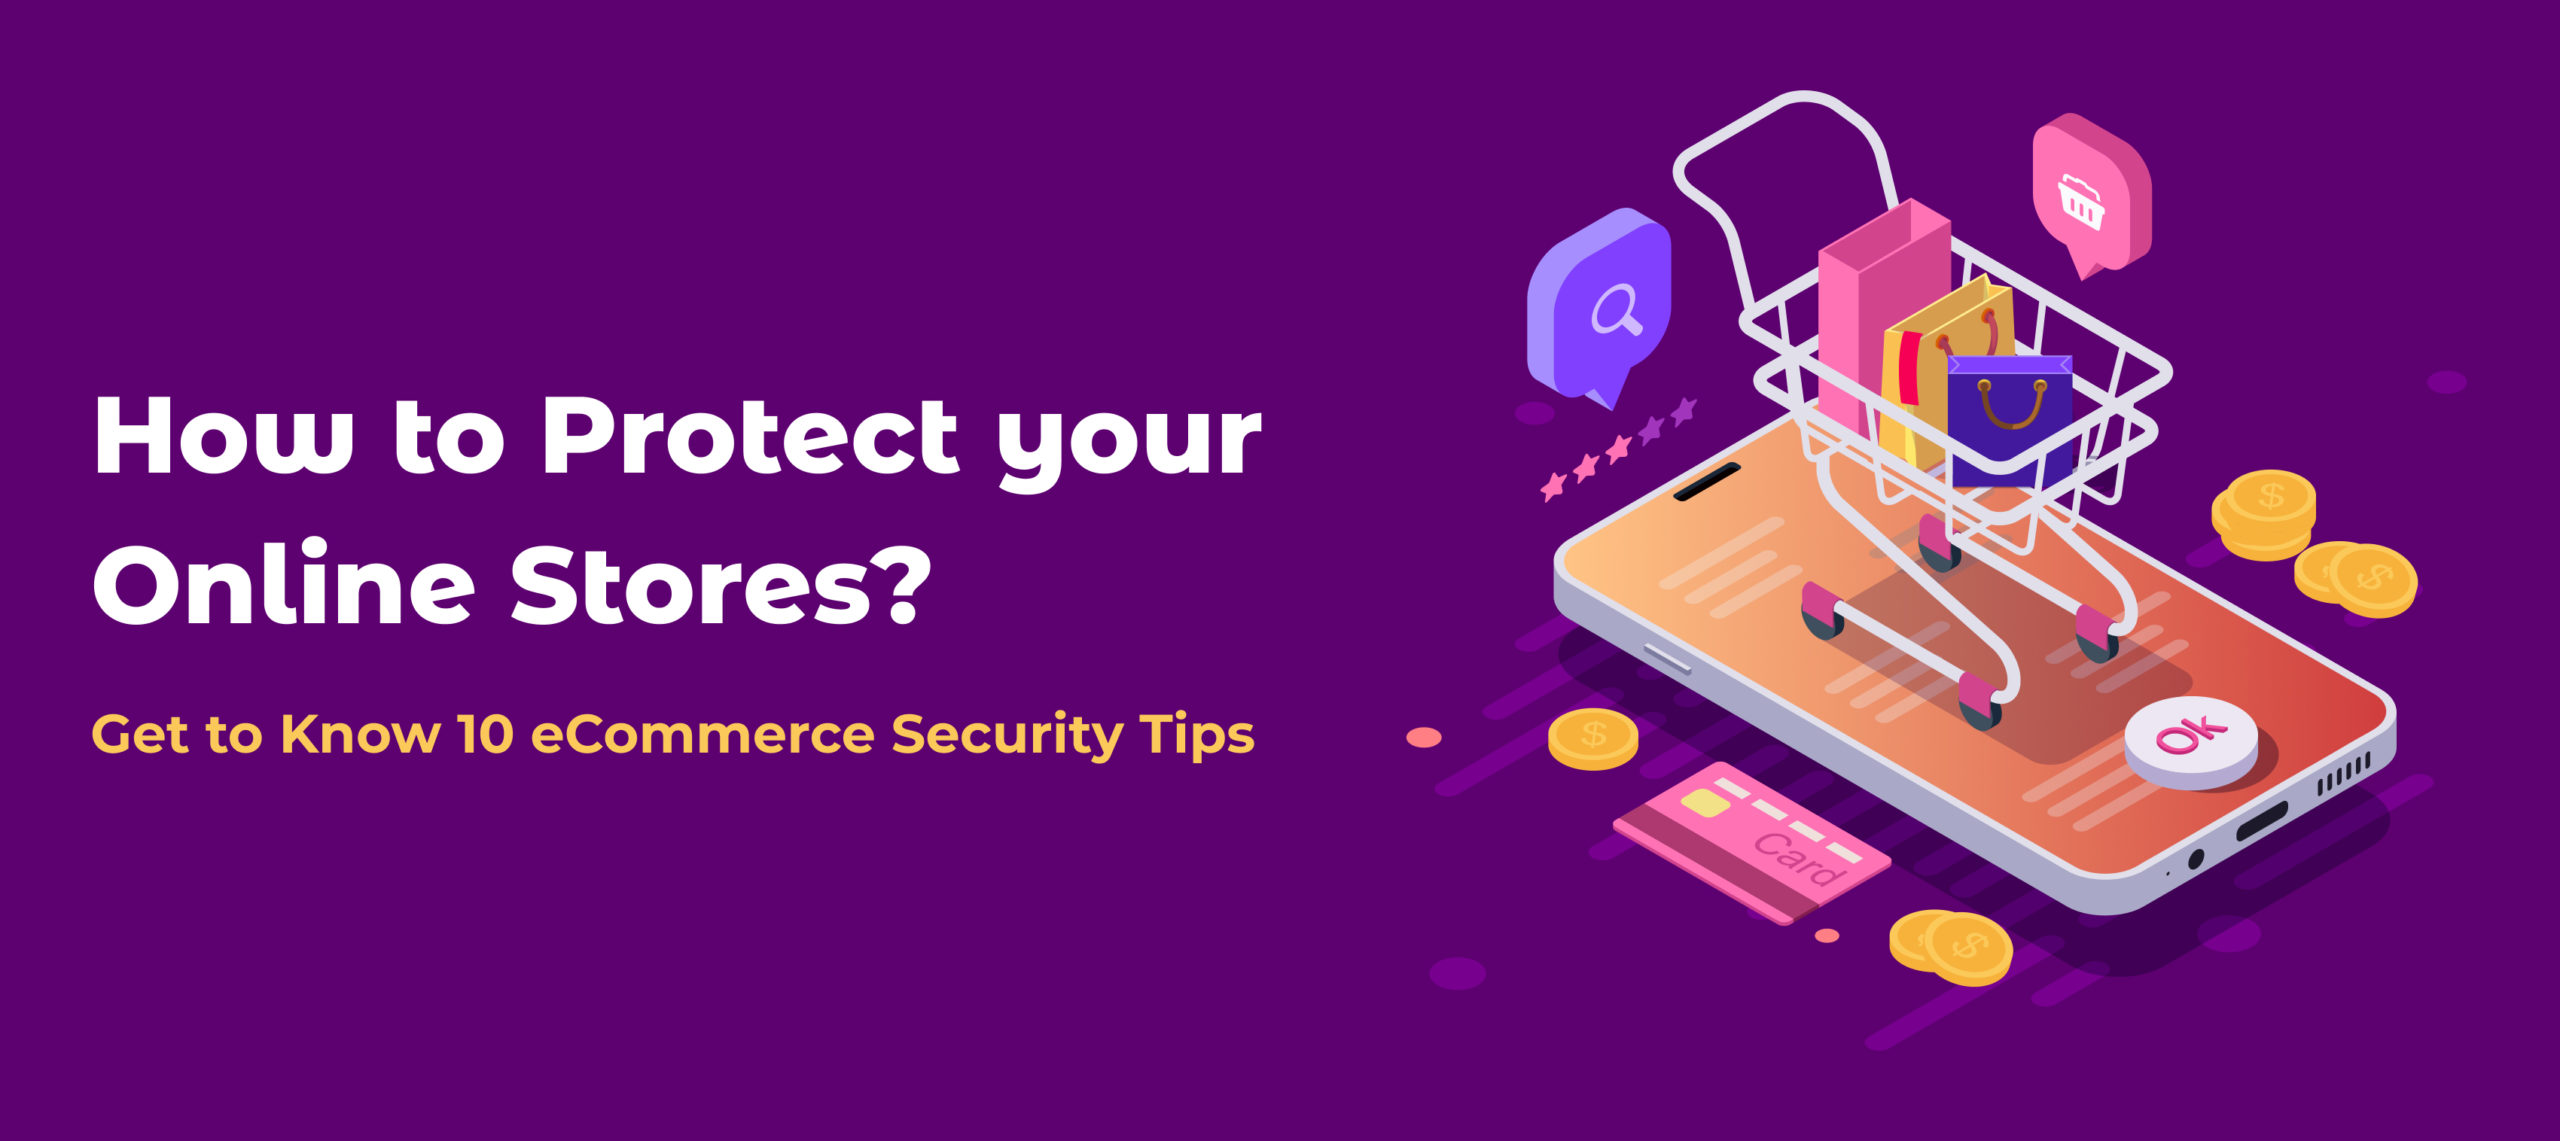  How to Protect your Online Stores? Get to Know 10 eCommerce Security Tips